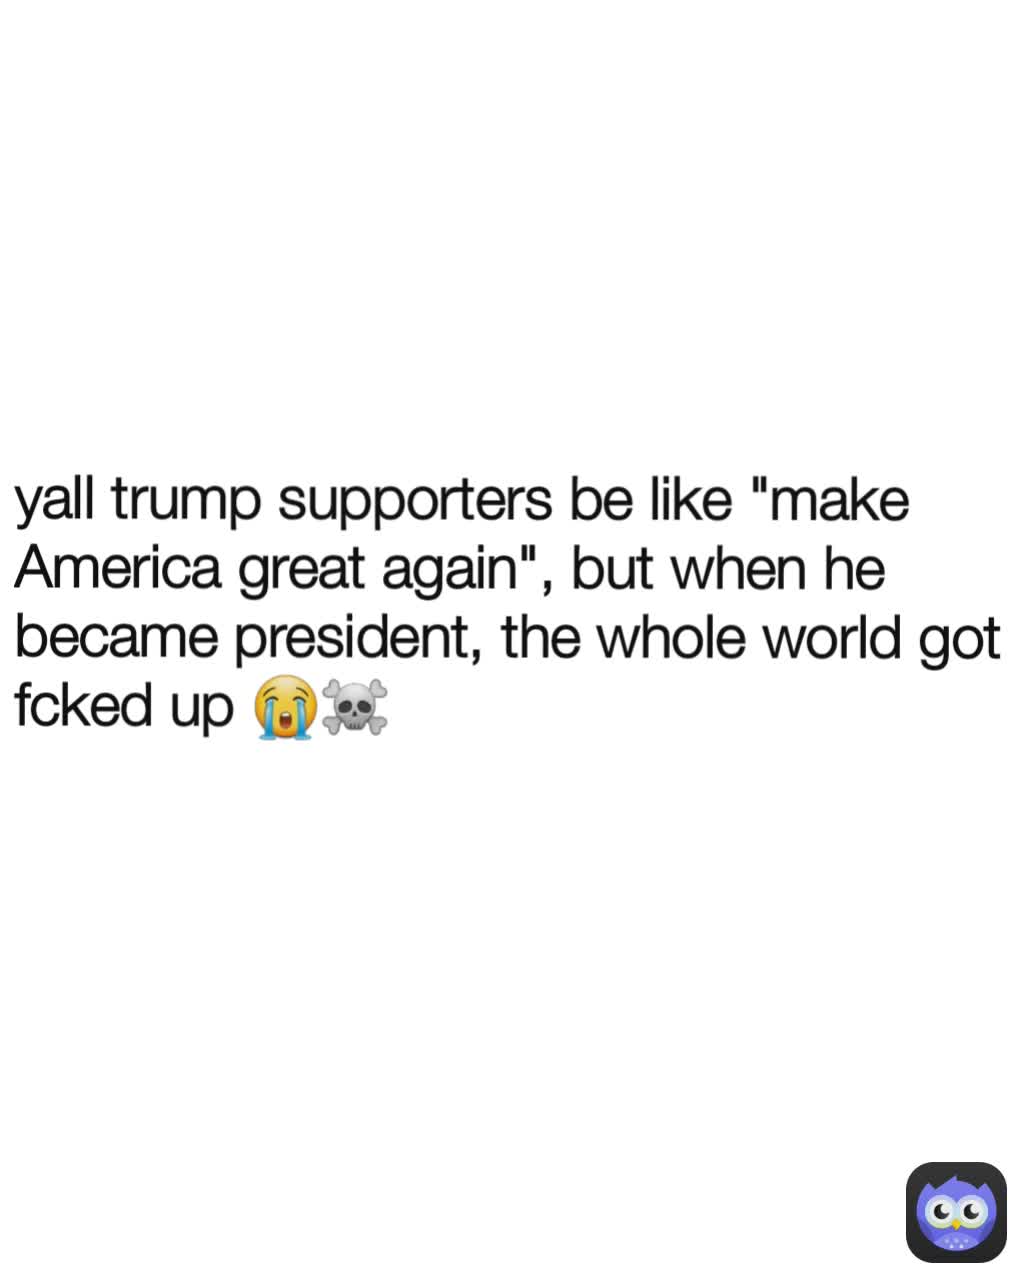 yall trump supporters be like "make America great again", but when he became president, the whole world got fcked up 😭☠